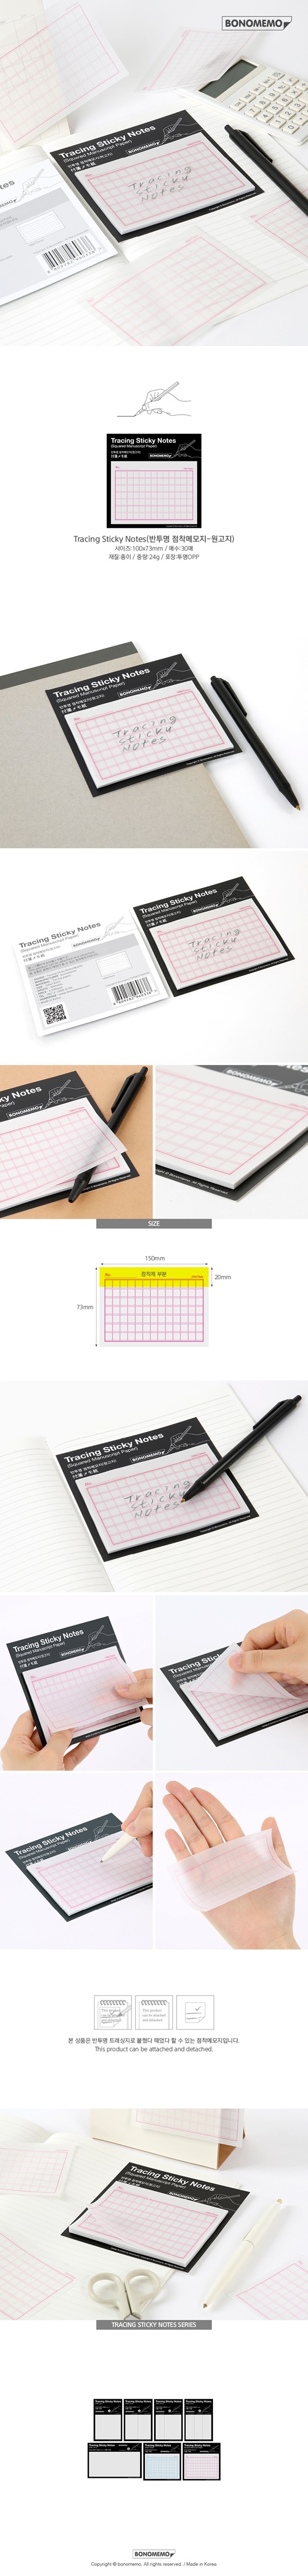 Tracing Sticky Notes  (Squared Manuscript Paper)